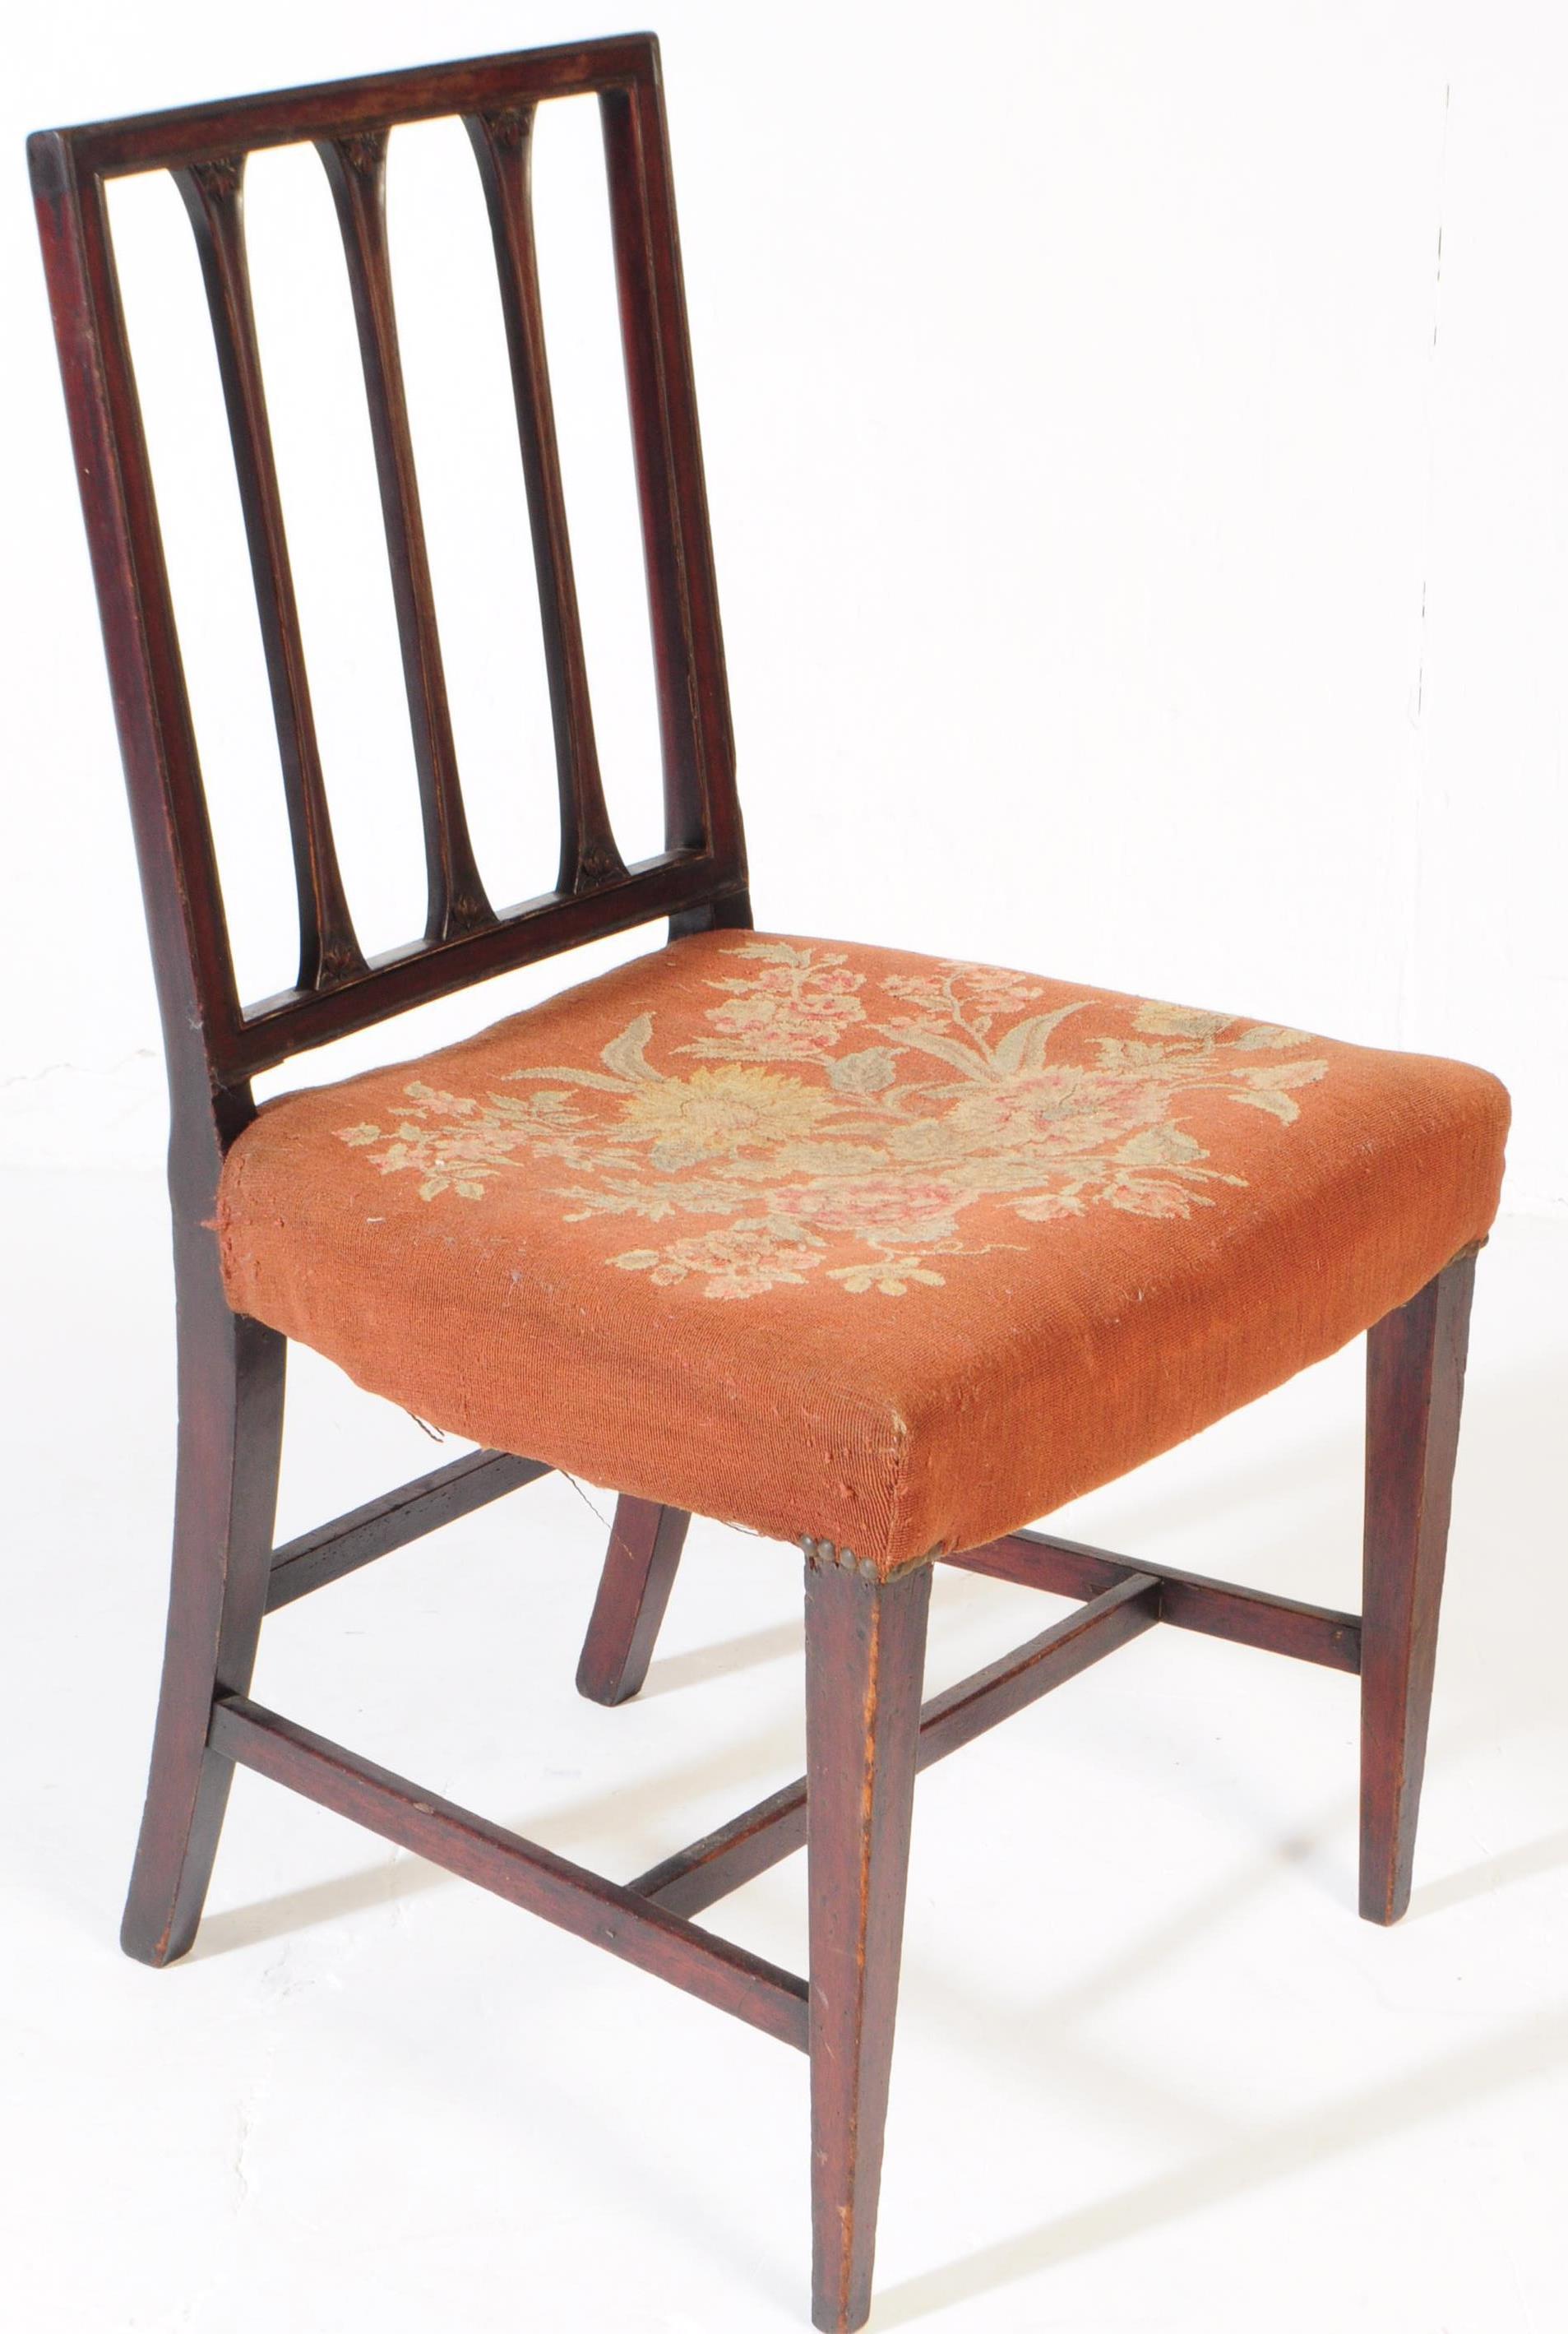 TWO GEORGE III 19TH CENTURY ROSEWOOD DINING CHAIRS - Image 2 of 6